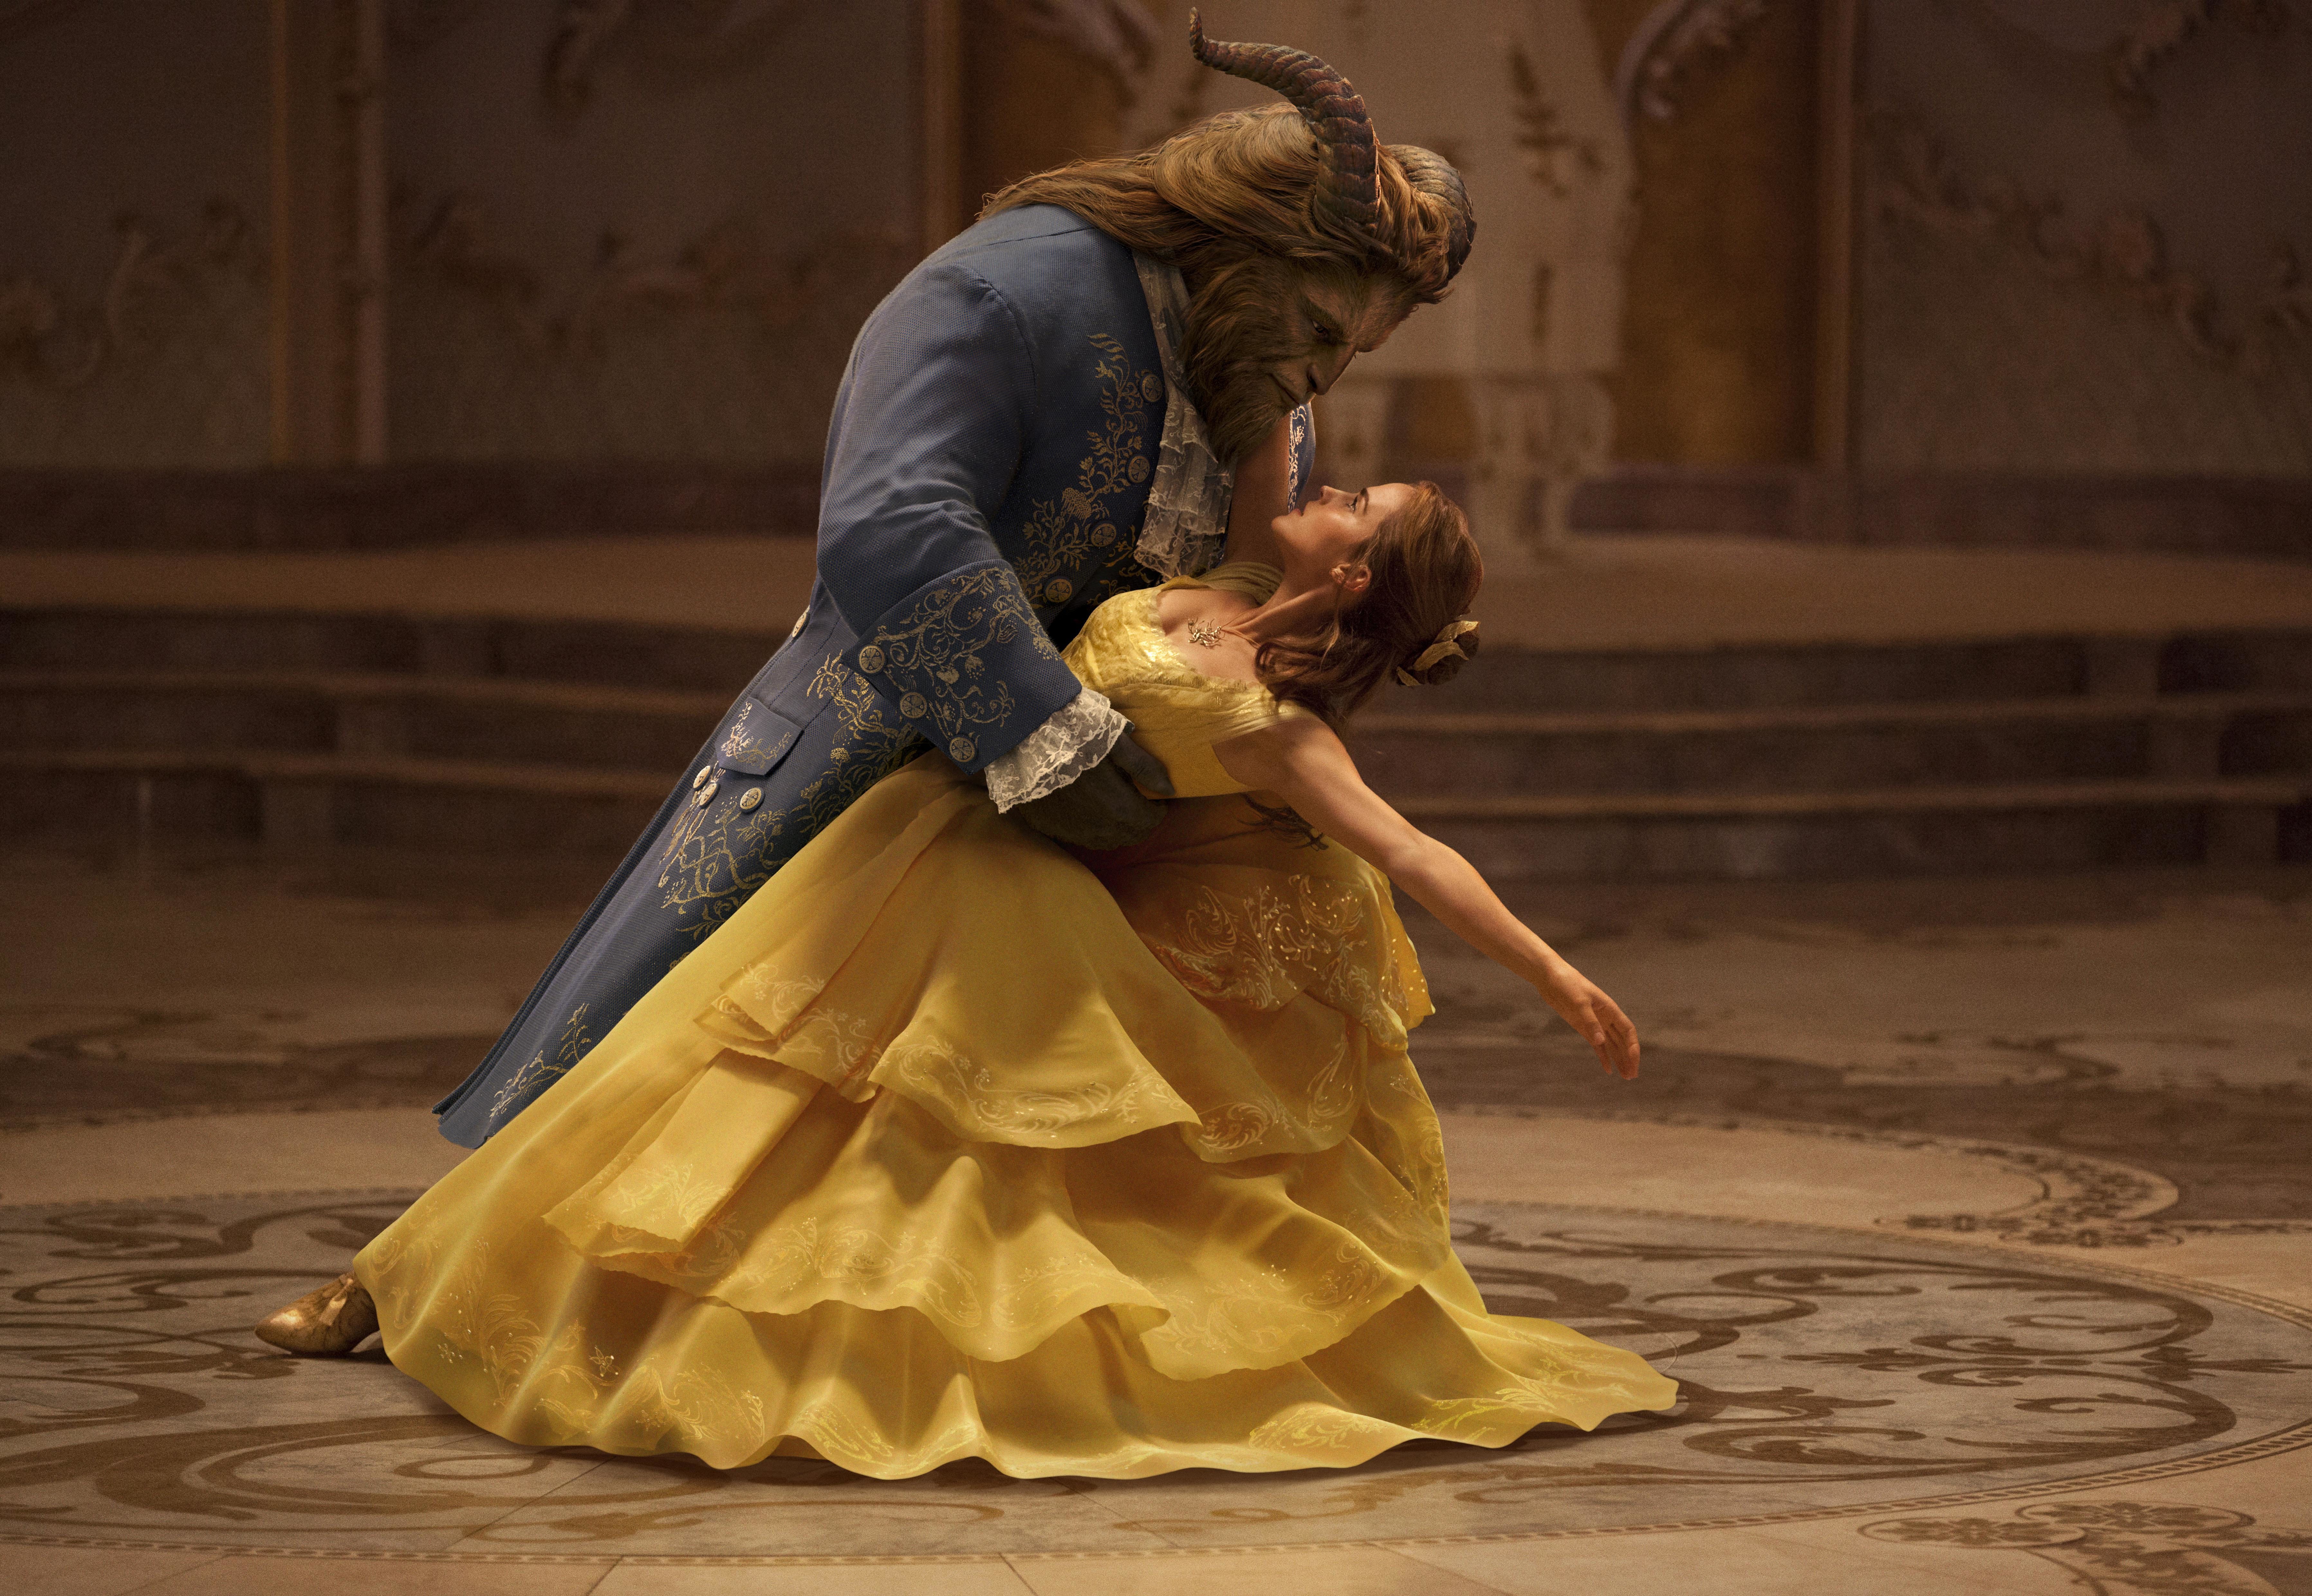 FILE - This file image released by Disney shows Dan Stevens as The Beast, left, and Emma Watson as Belle in a live-action adaptation of the animated classic "Beauty and the Beast." On the last day of the calendar year, “Star Wars: The Last Jedi” has surpassed “Beauty and the Beast” as the top grossing film in North America in 2017.